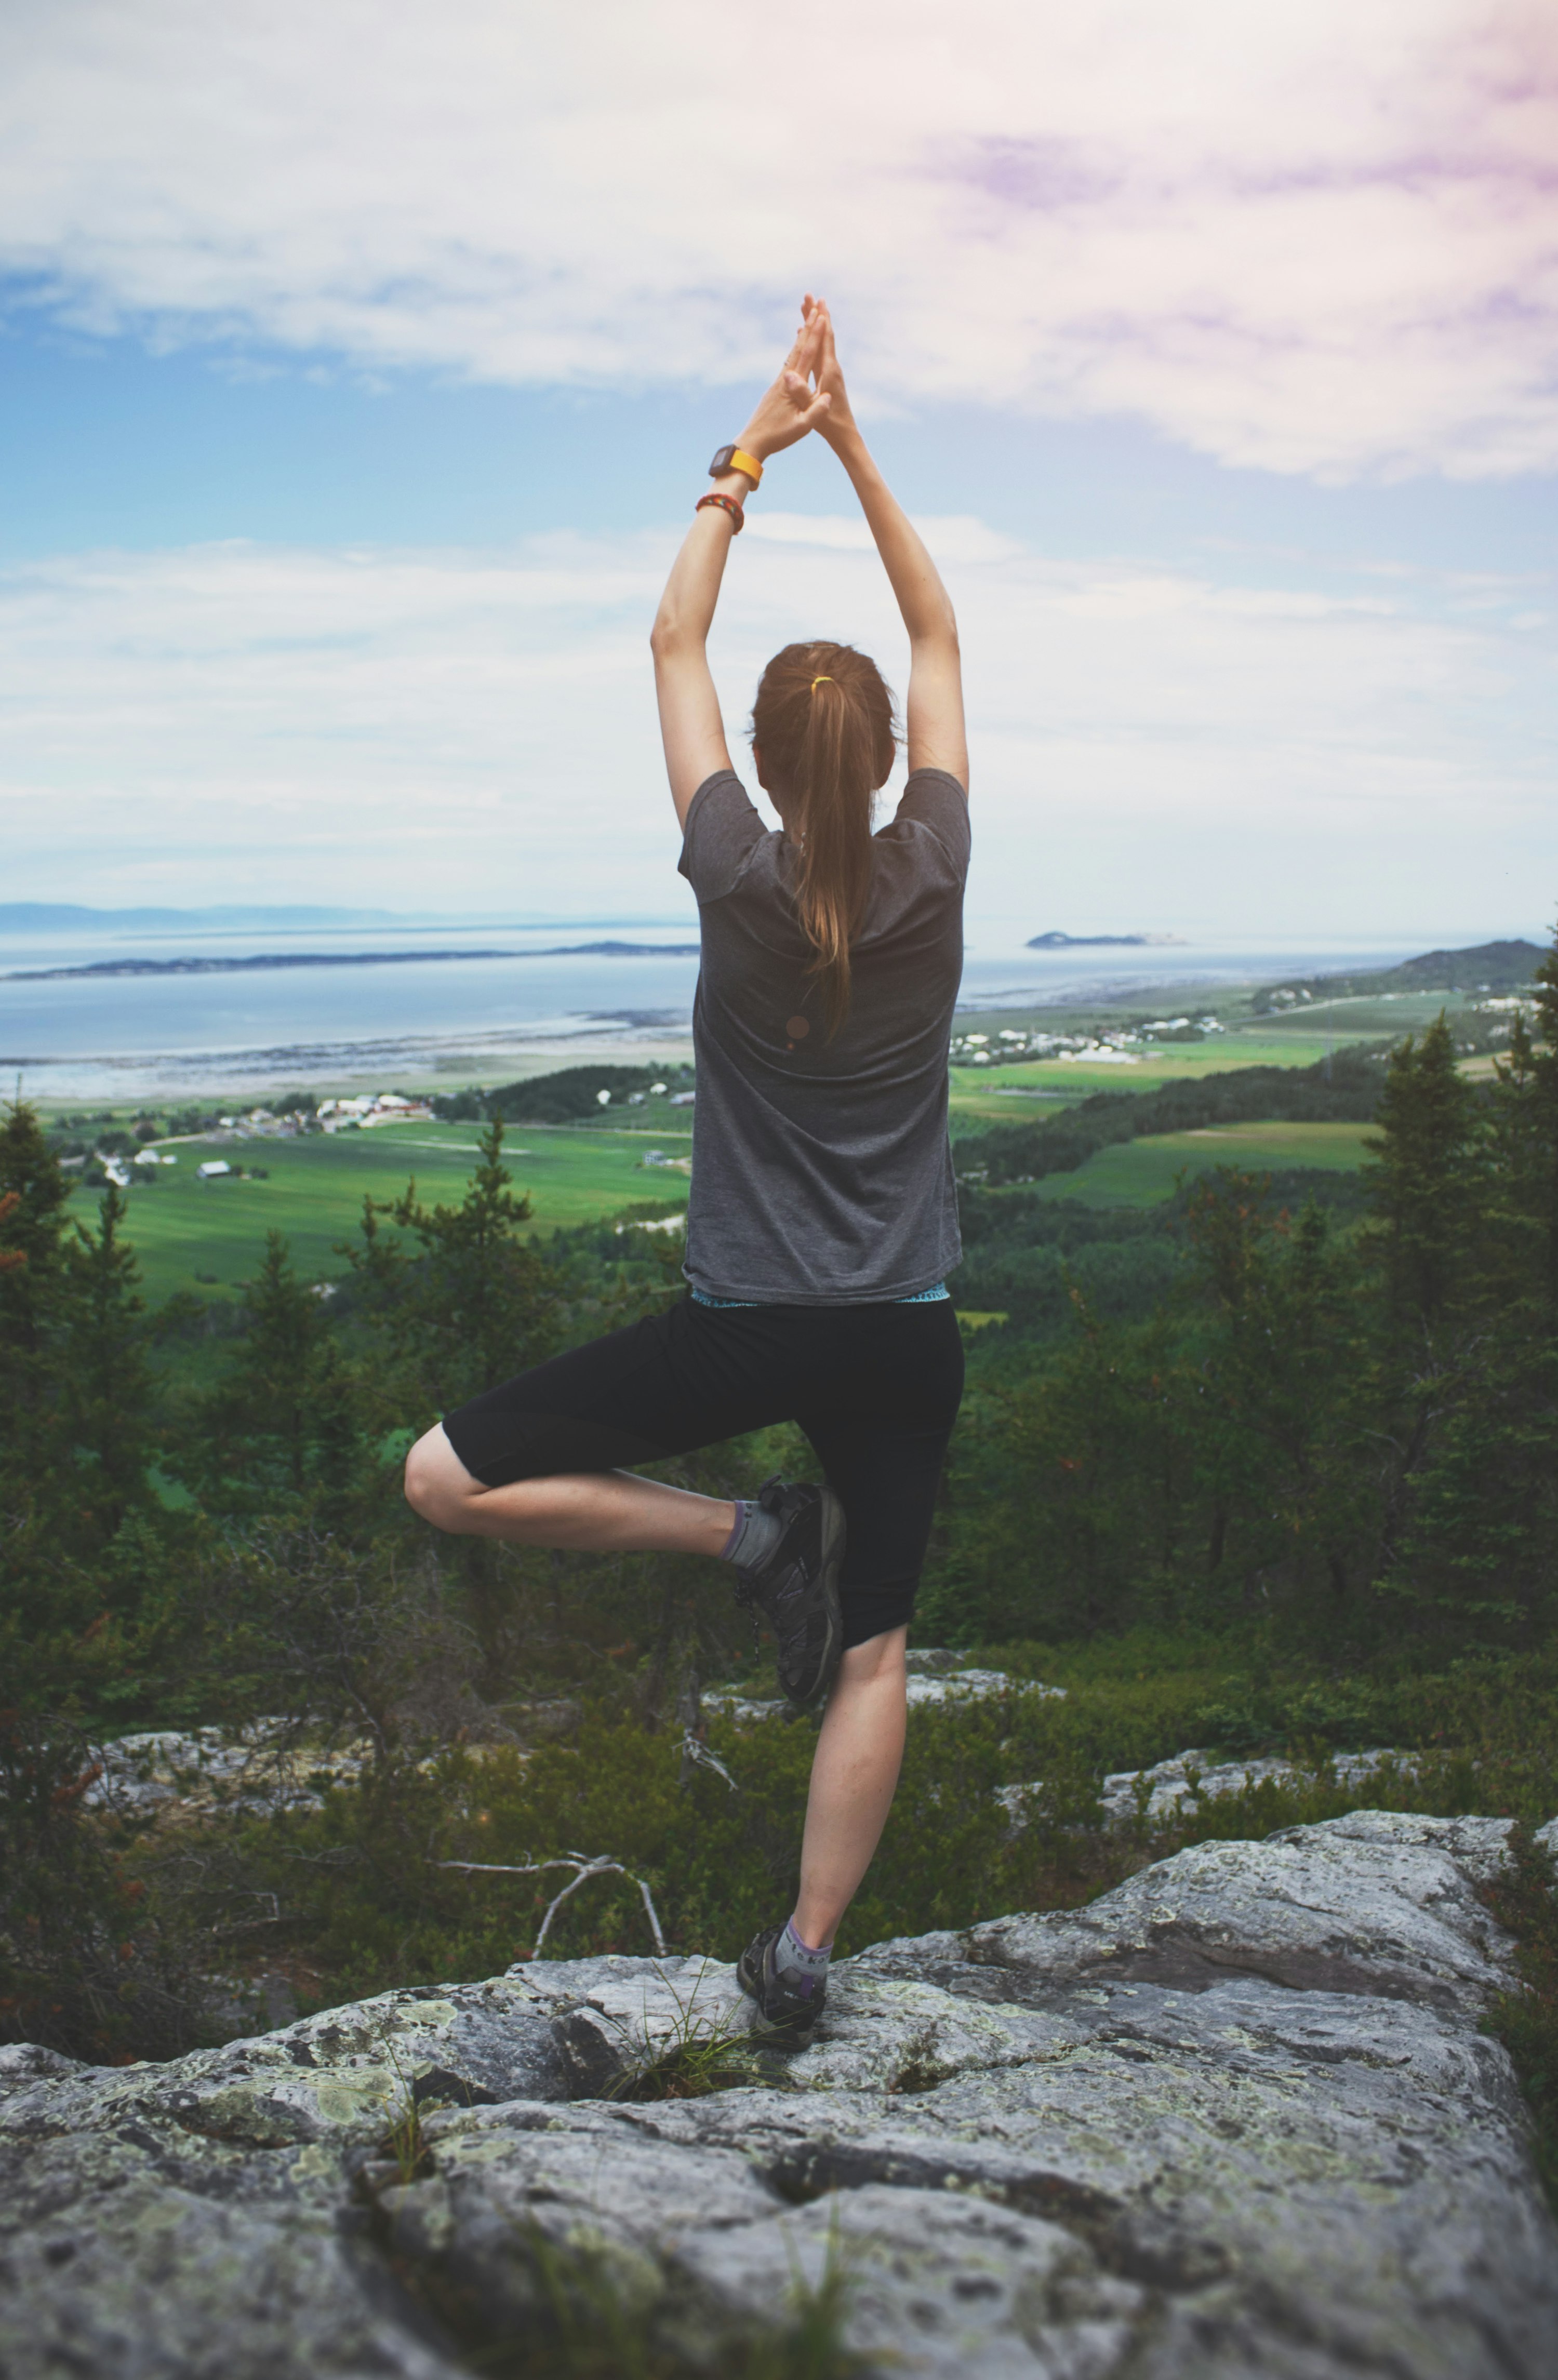 Yoga session at the top of a mountain in Kamouraska